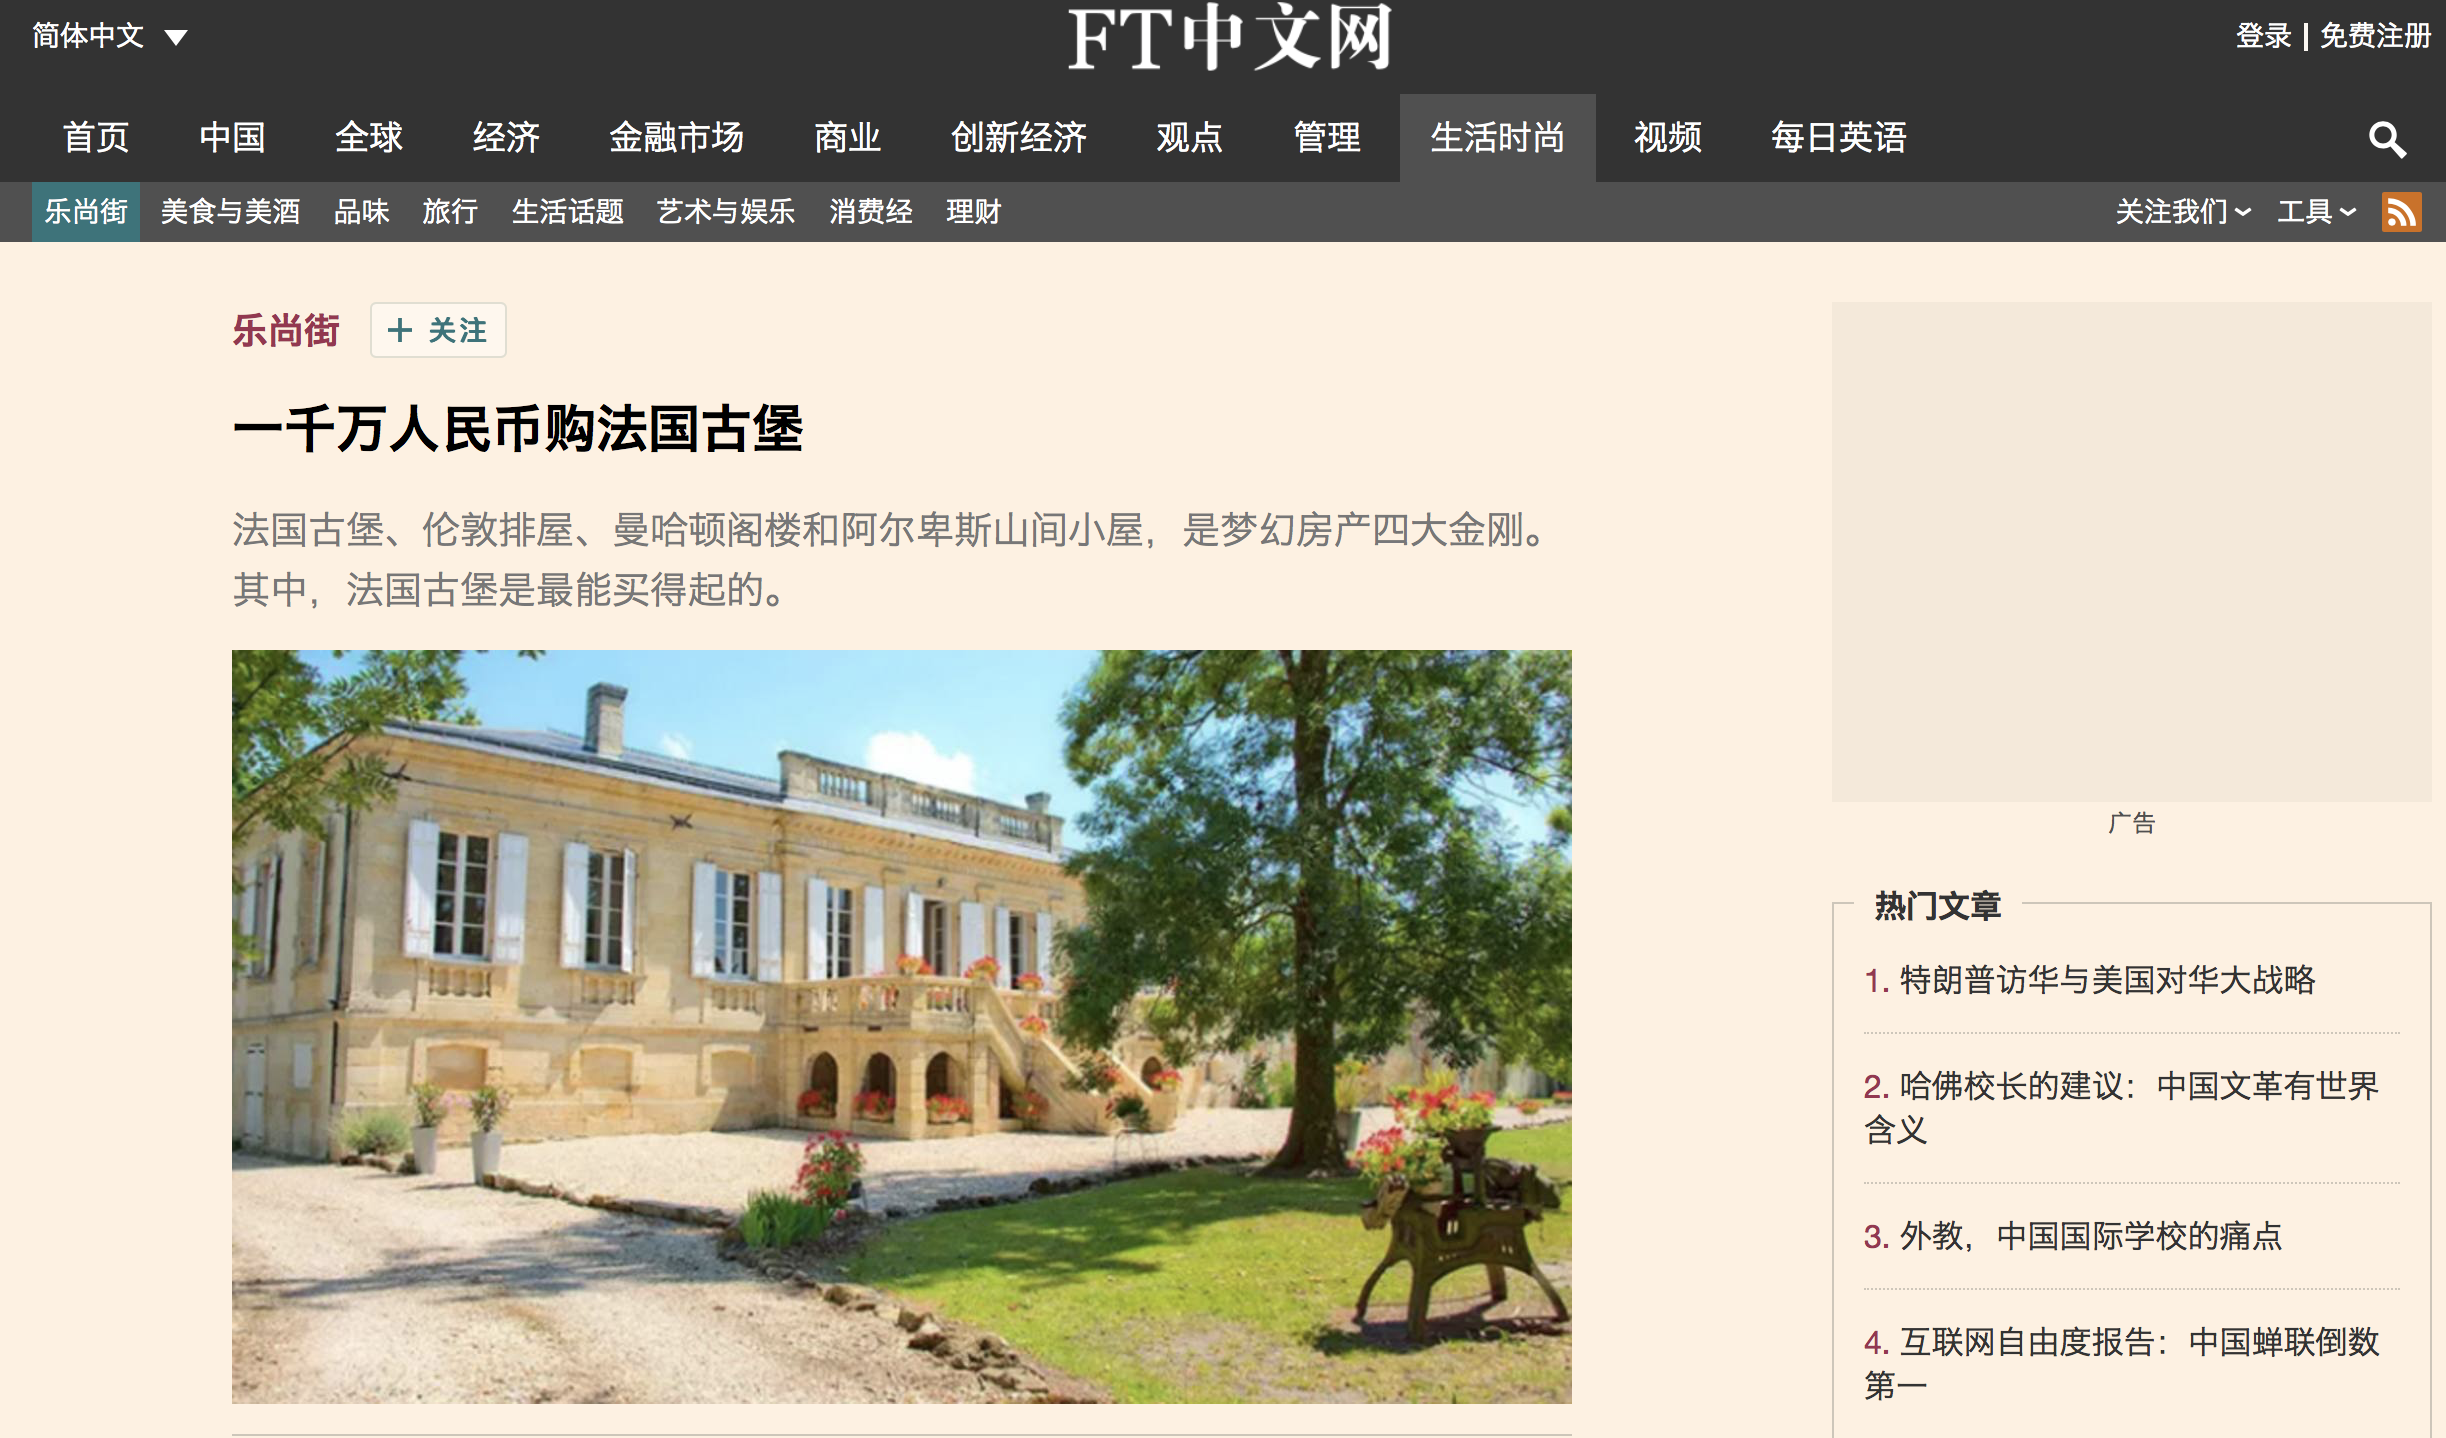 Financial Times China – French Chateaux